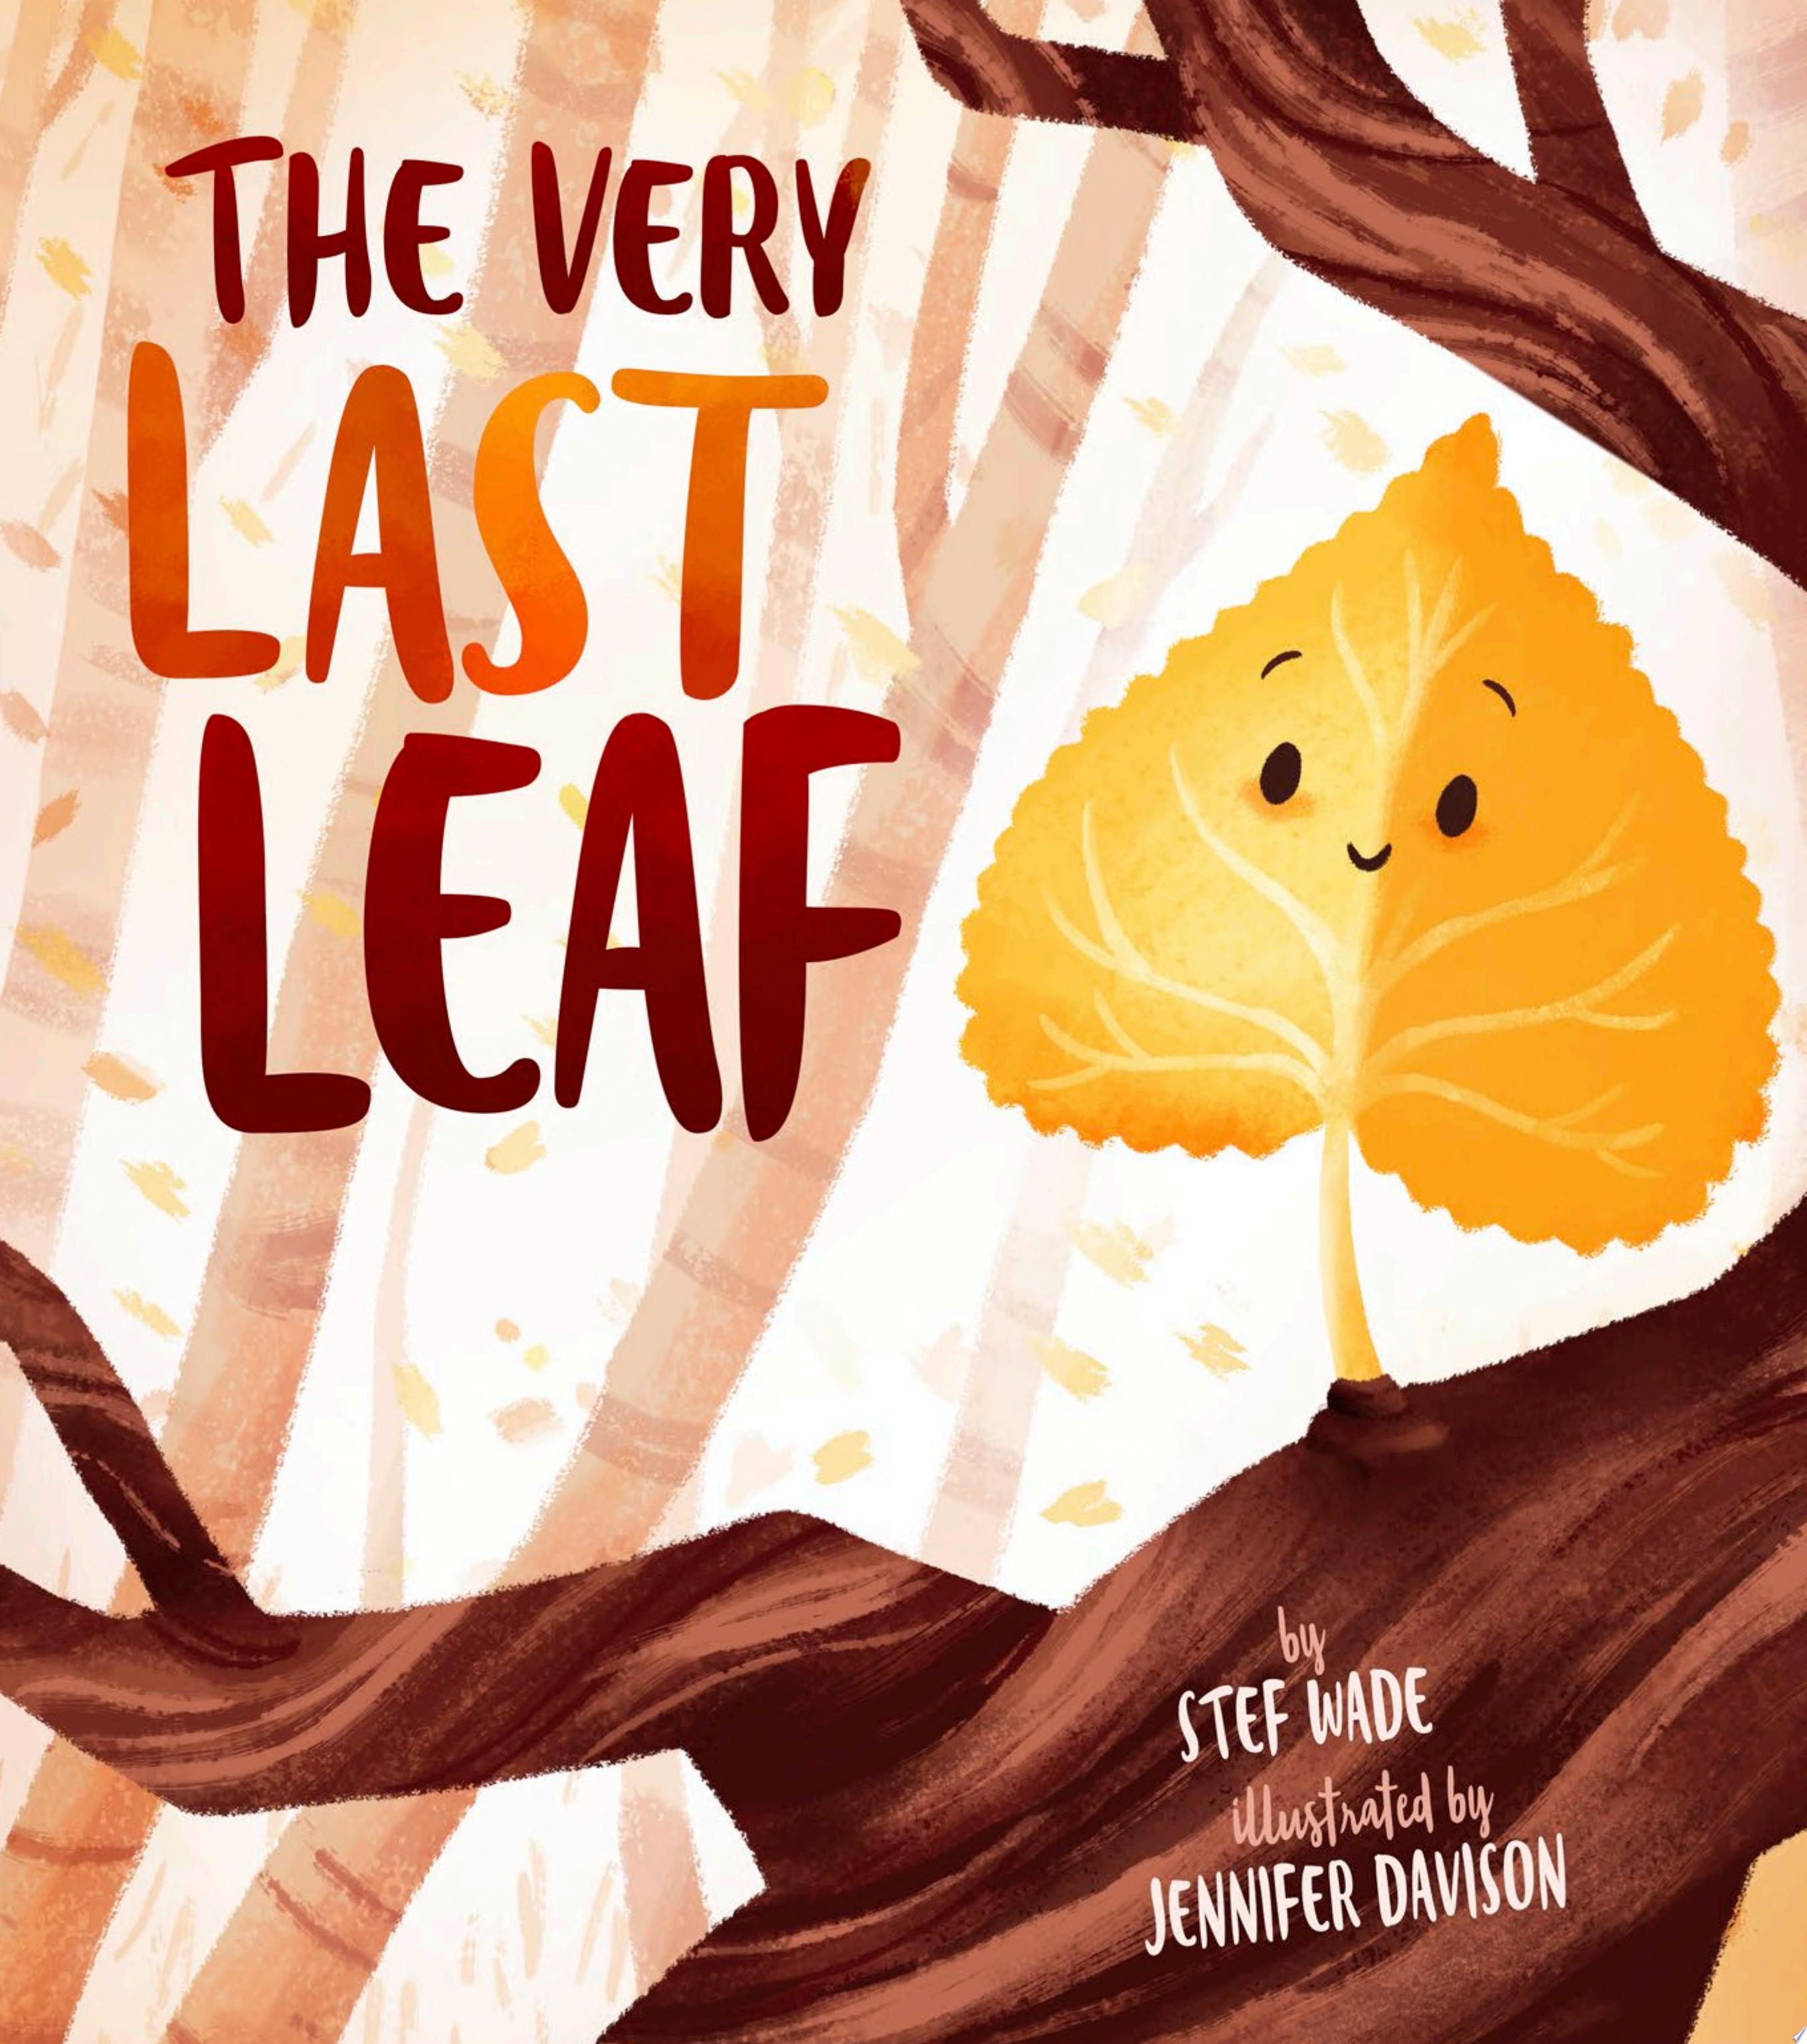 Image for "The Very Last Leaf"